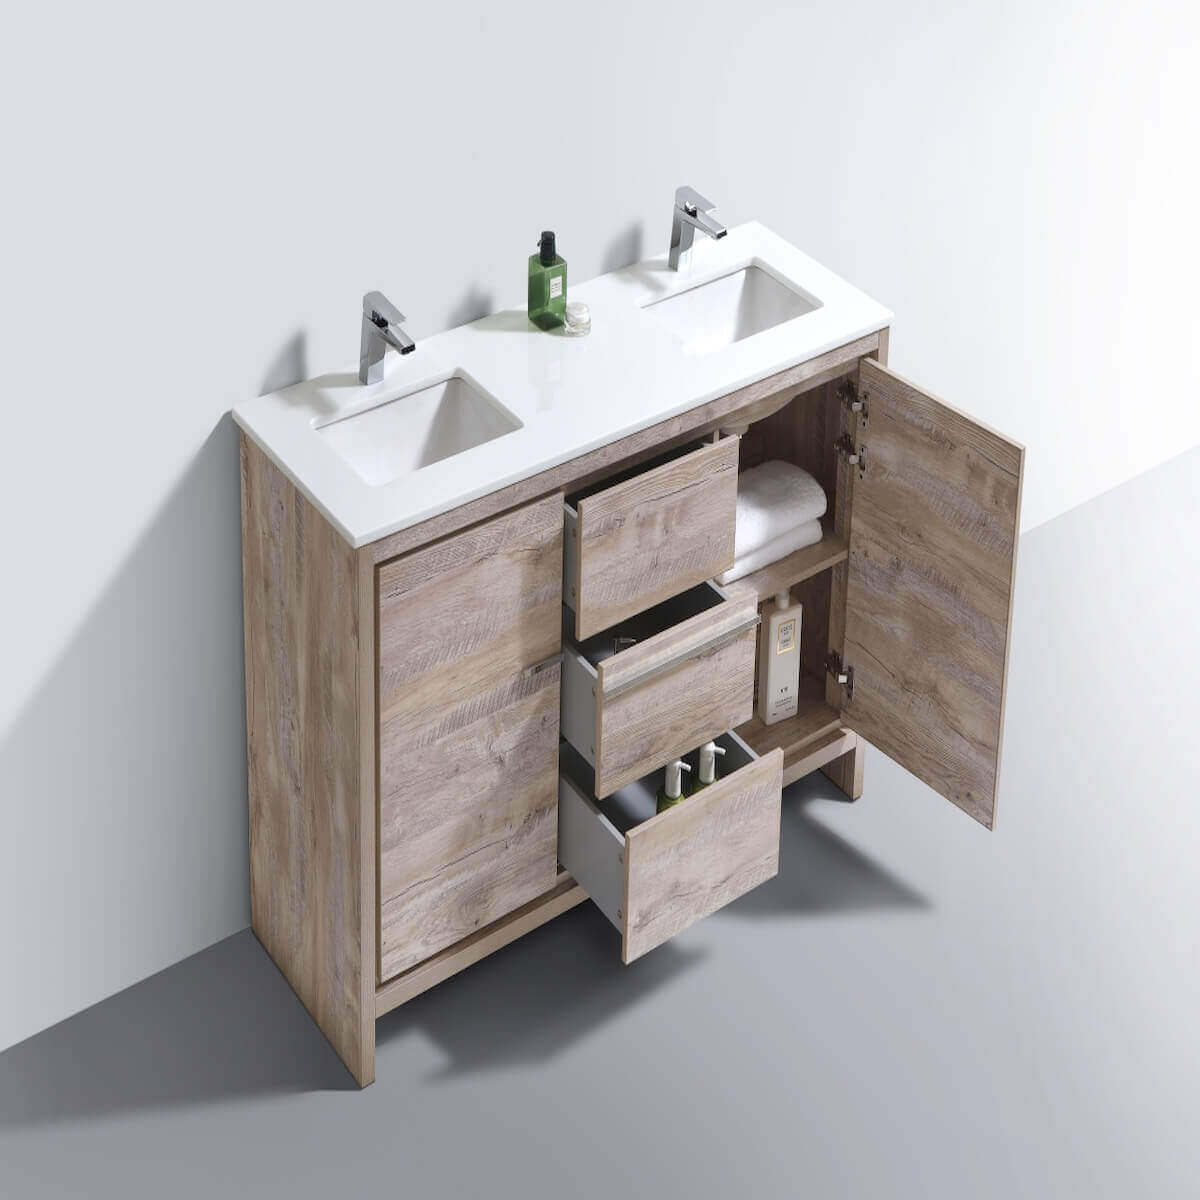 KubeBath Dolce 60" Nature Wood Freestanding Double Vanity with Quartz Countertop AD660DNW Inside #finish_nature wood